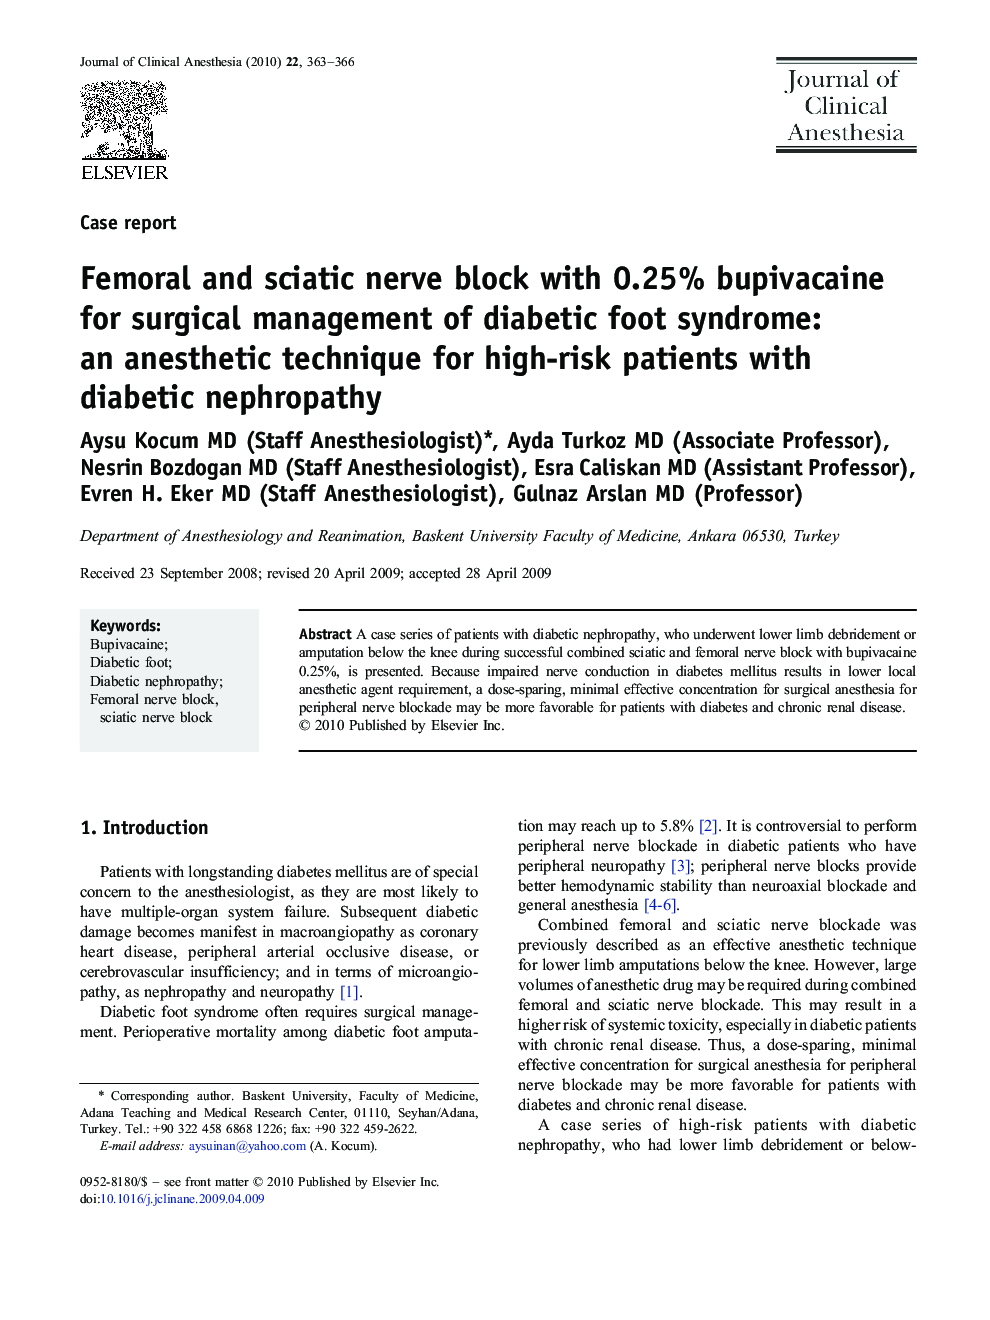 Femoral and sciatic nerve block with 0.25% bupivacaine for surgical management of diabetic foot syndrome: an anesthetic technique for high-risk patients with diabetic nephropathy